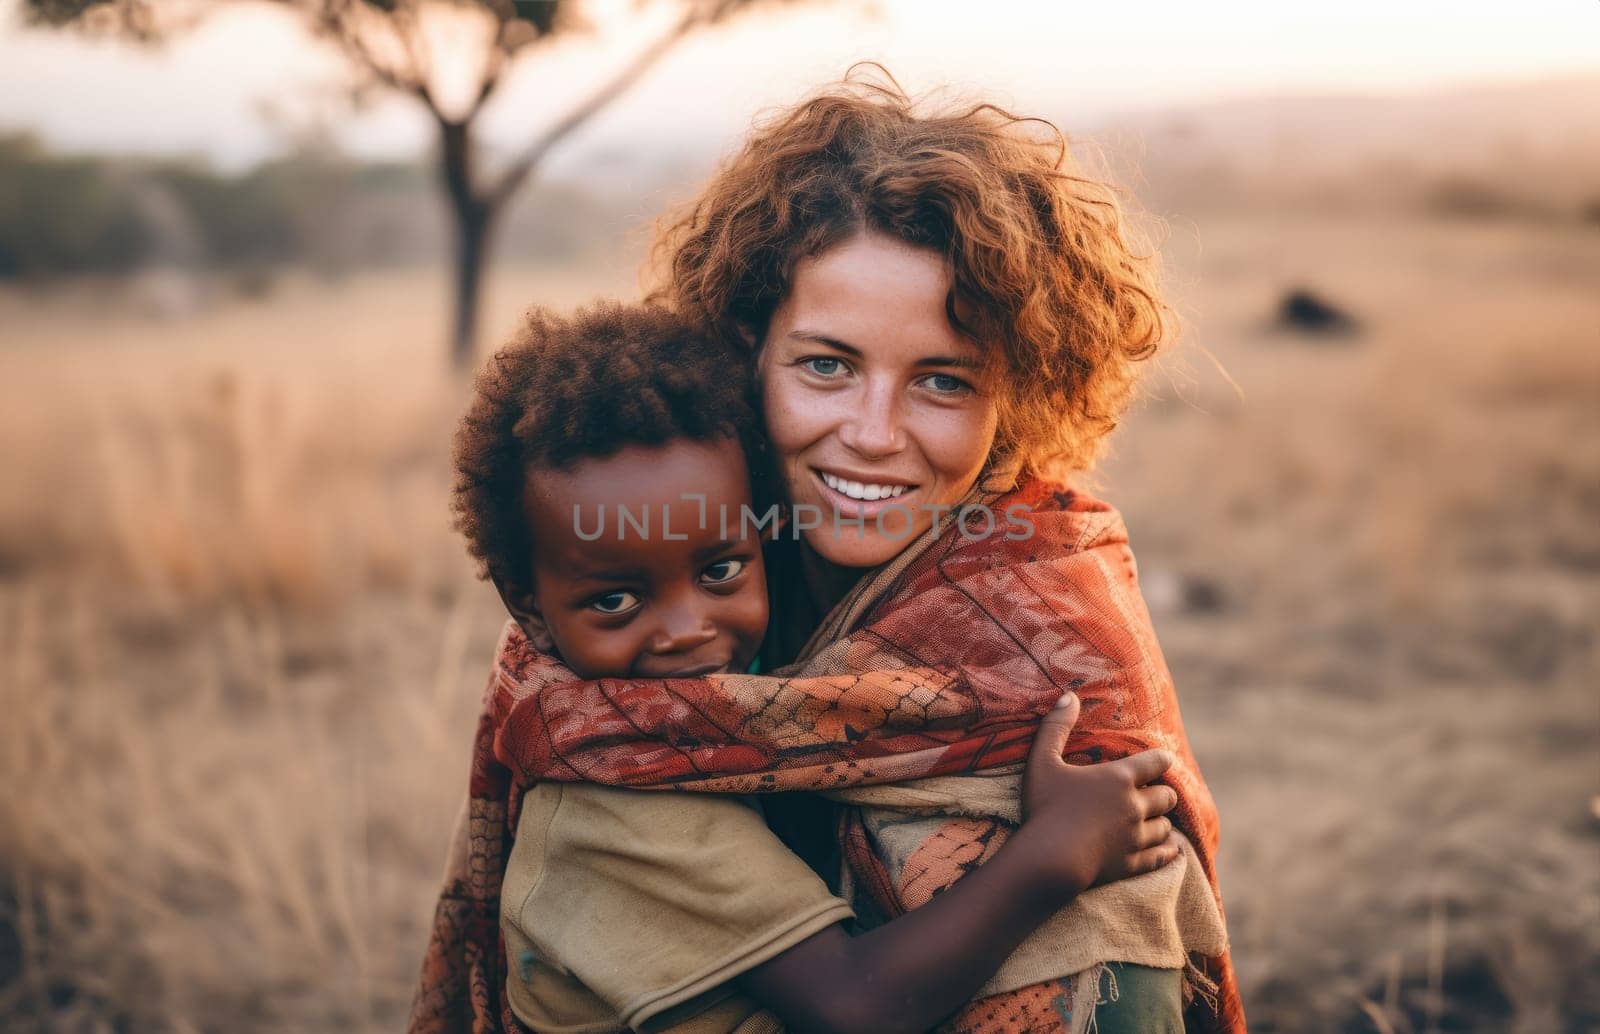 a powerful moment of cross-cultural connection, a European volunteer embraces an African-American child in the African desert, exemplifying the universal language of compassion and human solidarity.